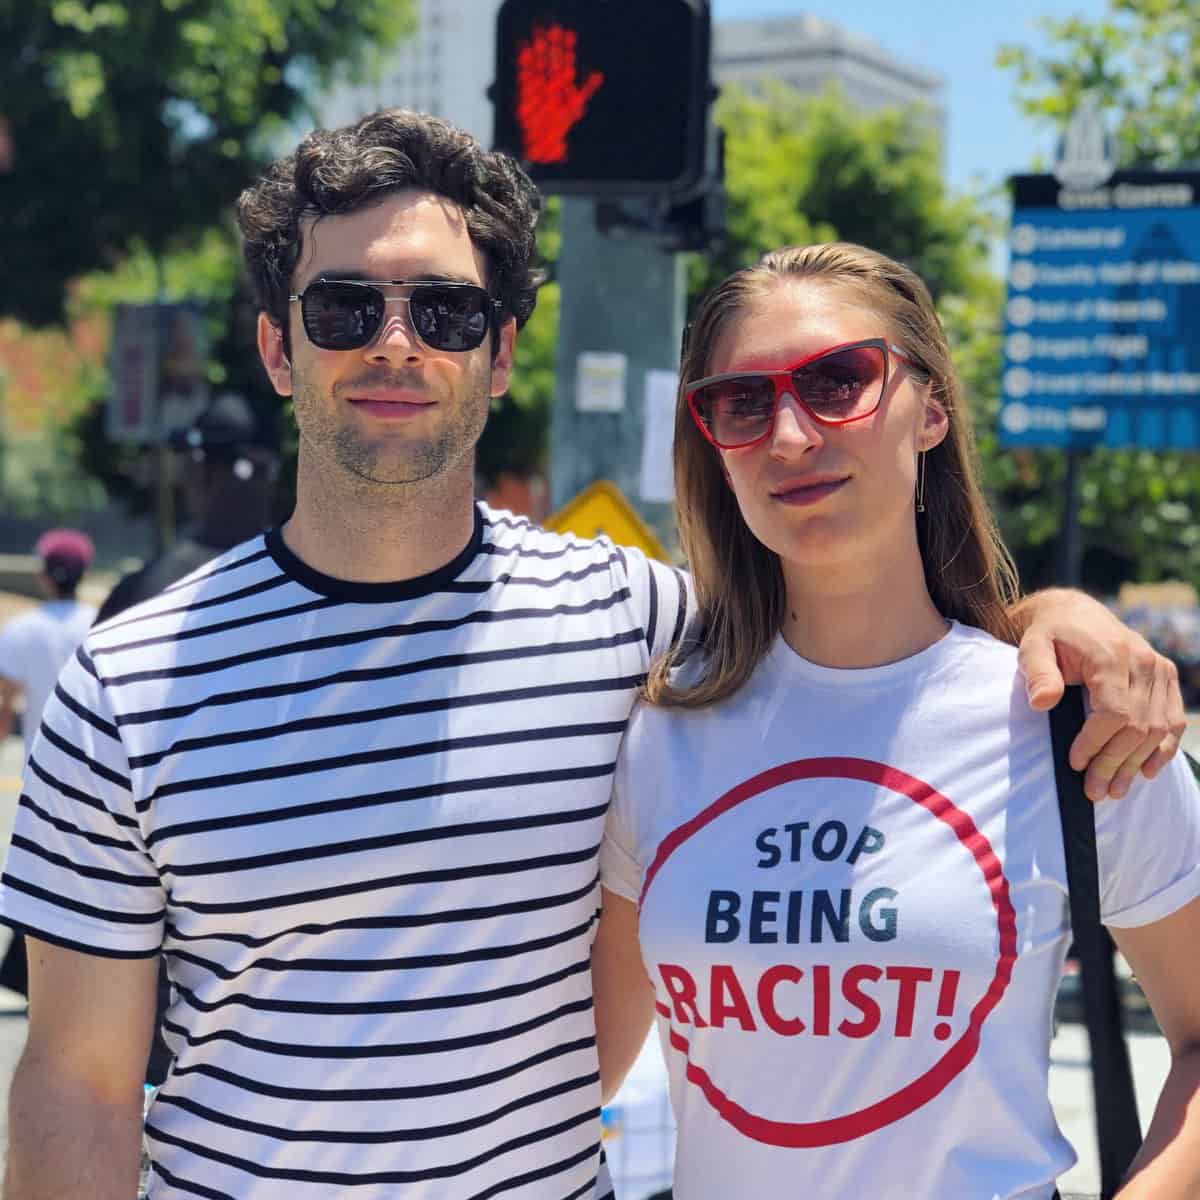 Image of Ethan Peck with his girlfriend, Molly Swenson